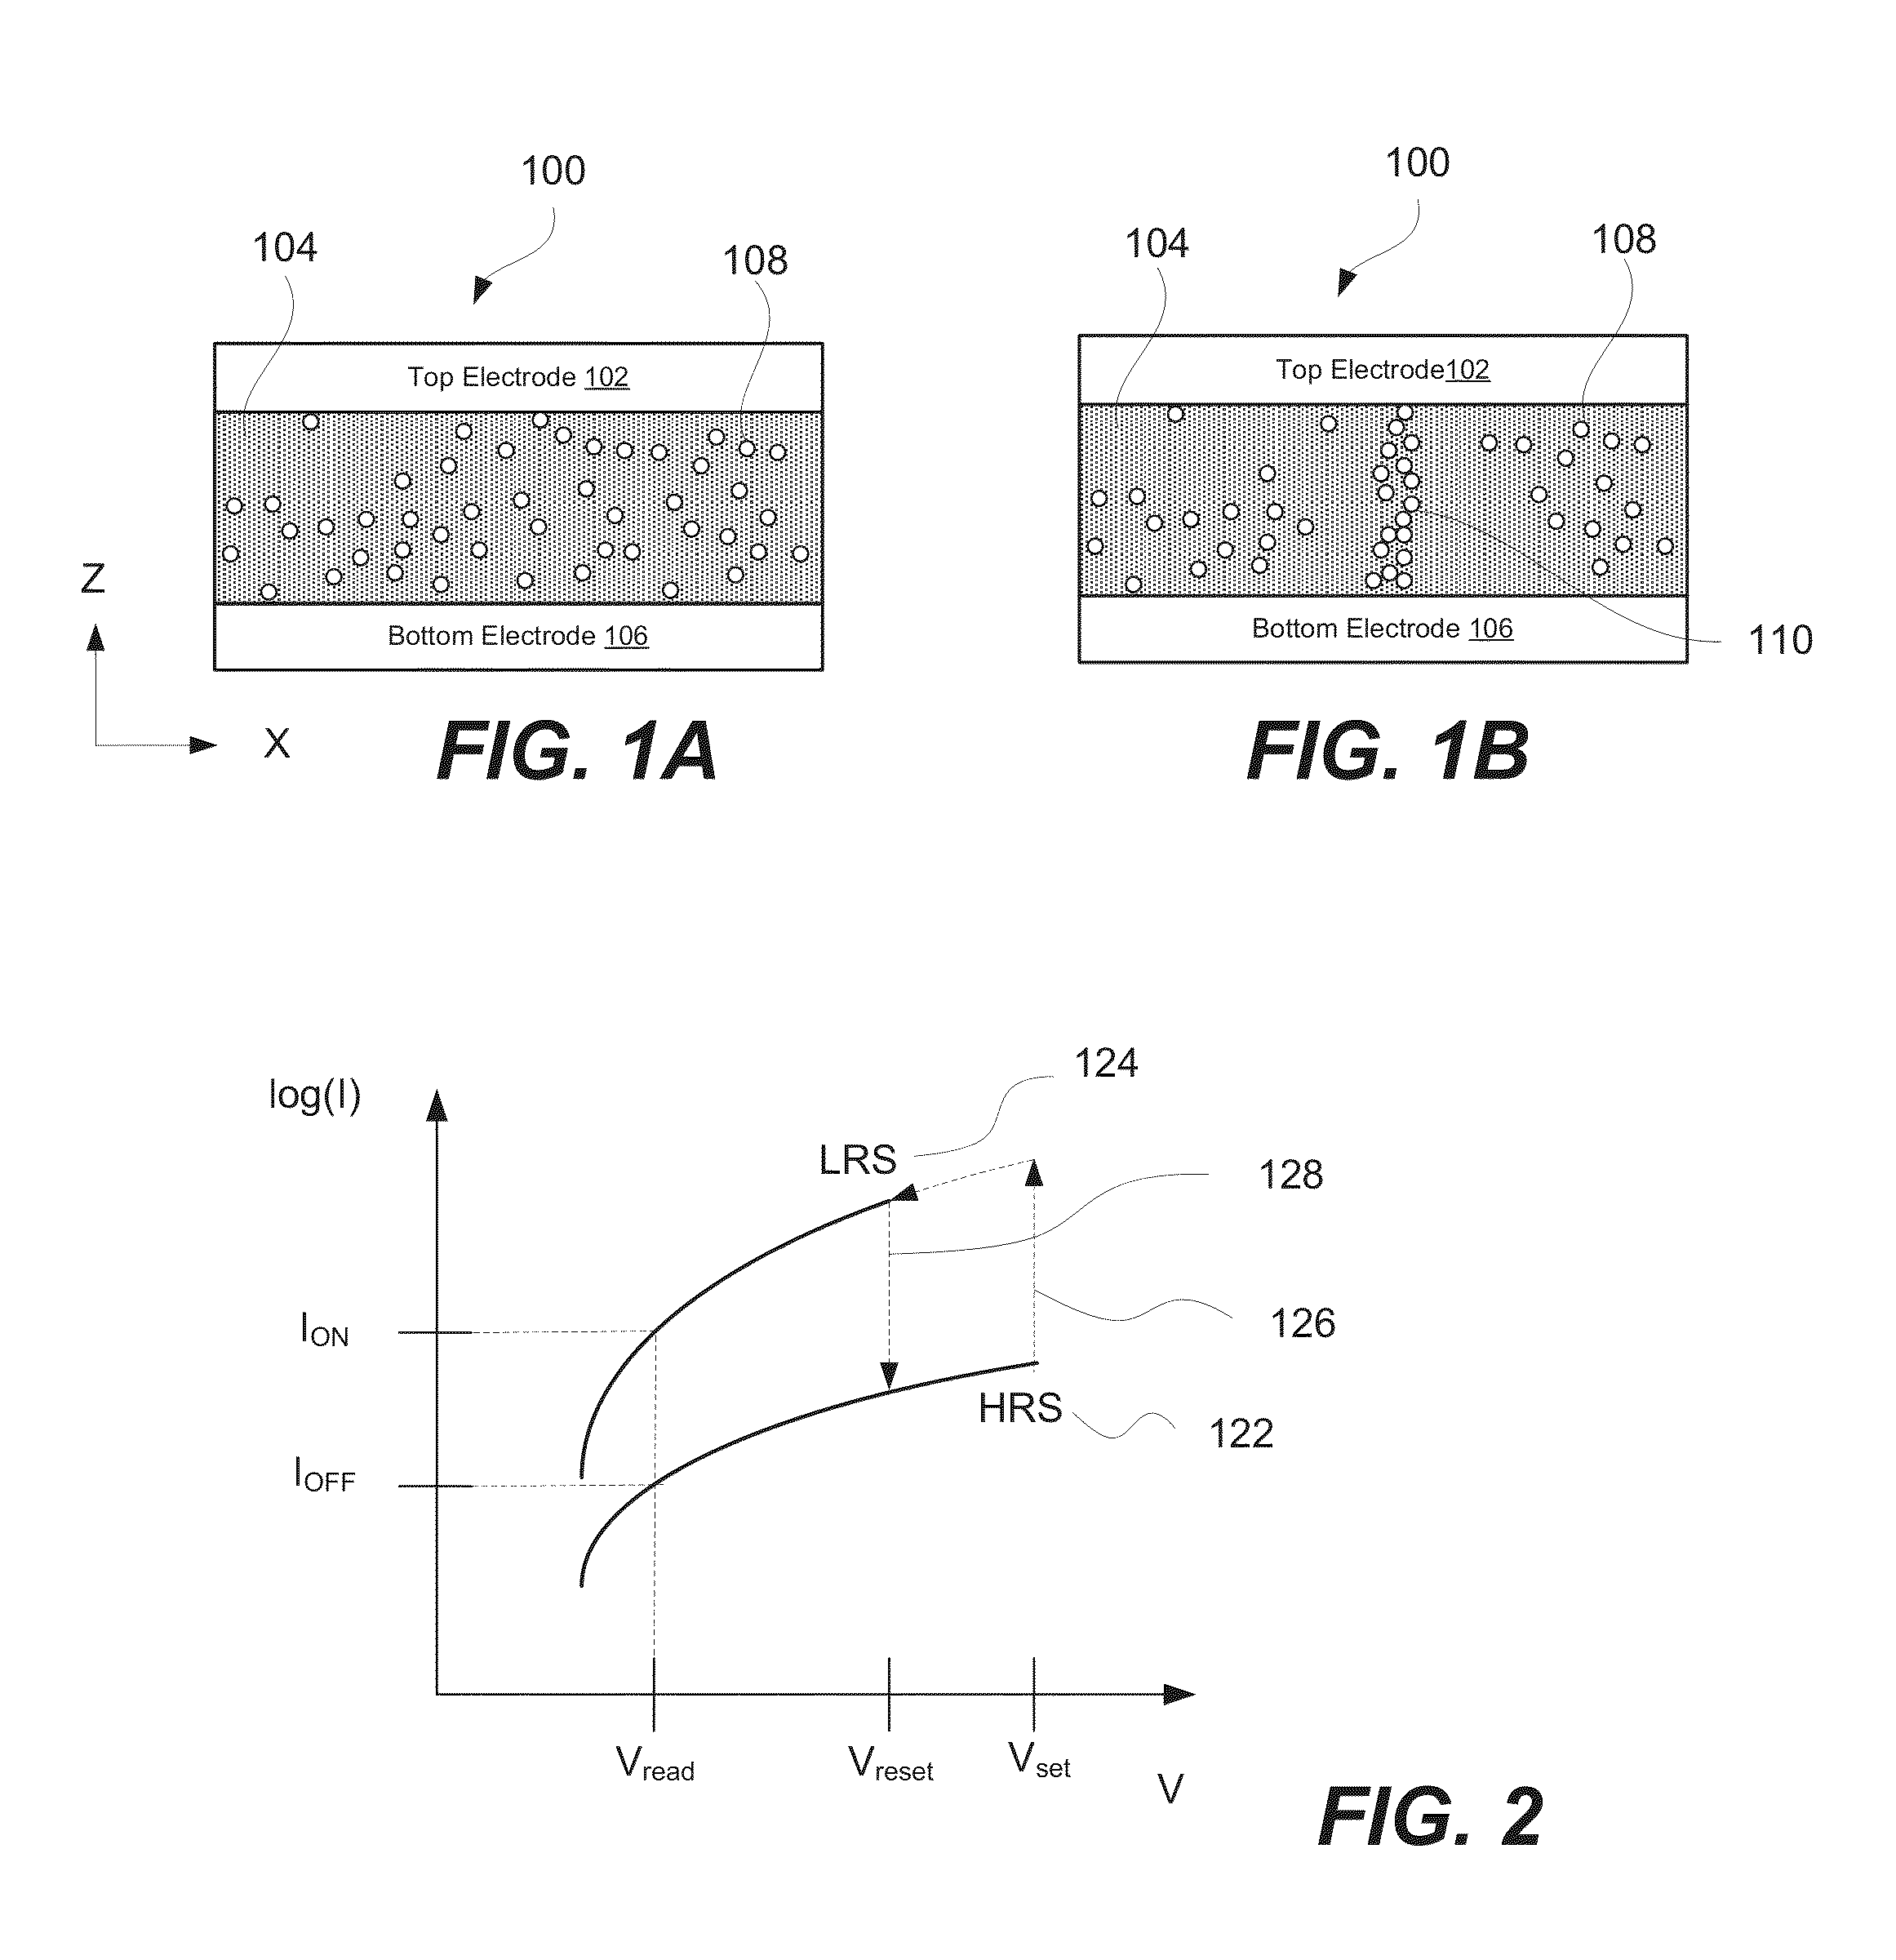 Resistive Random Access Memory Access Cells Having Thermally Isolating Structures